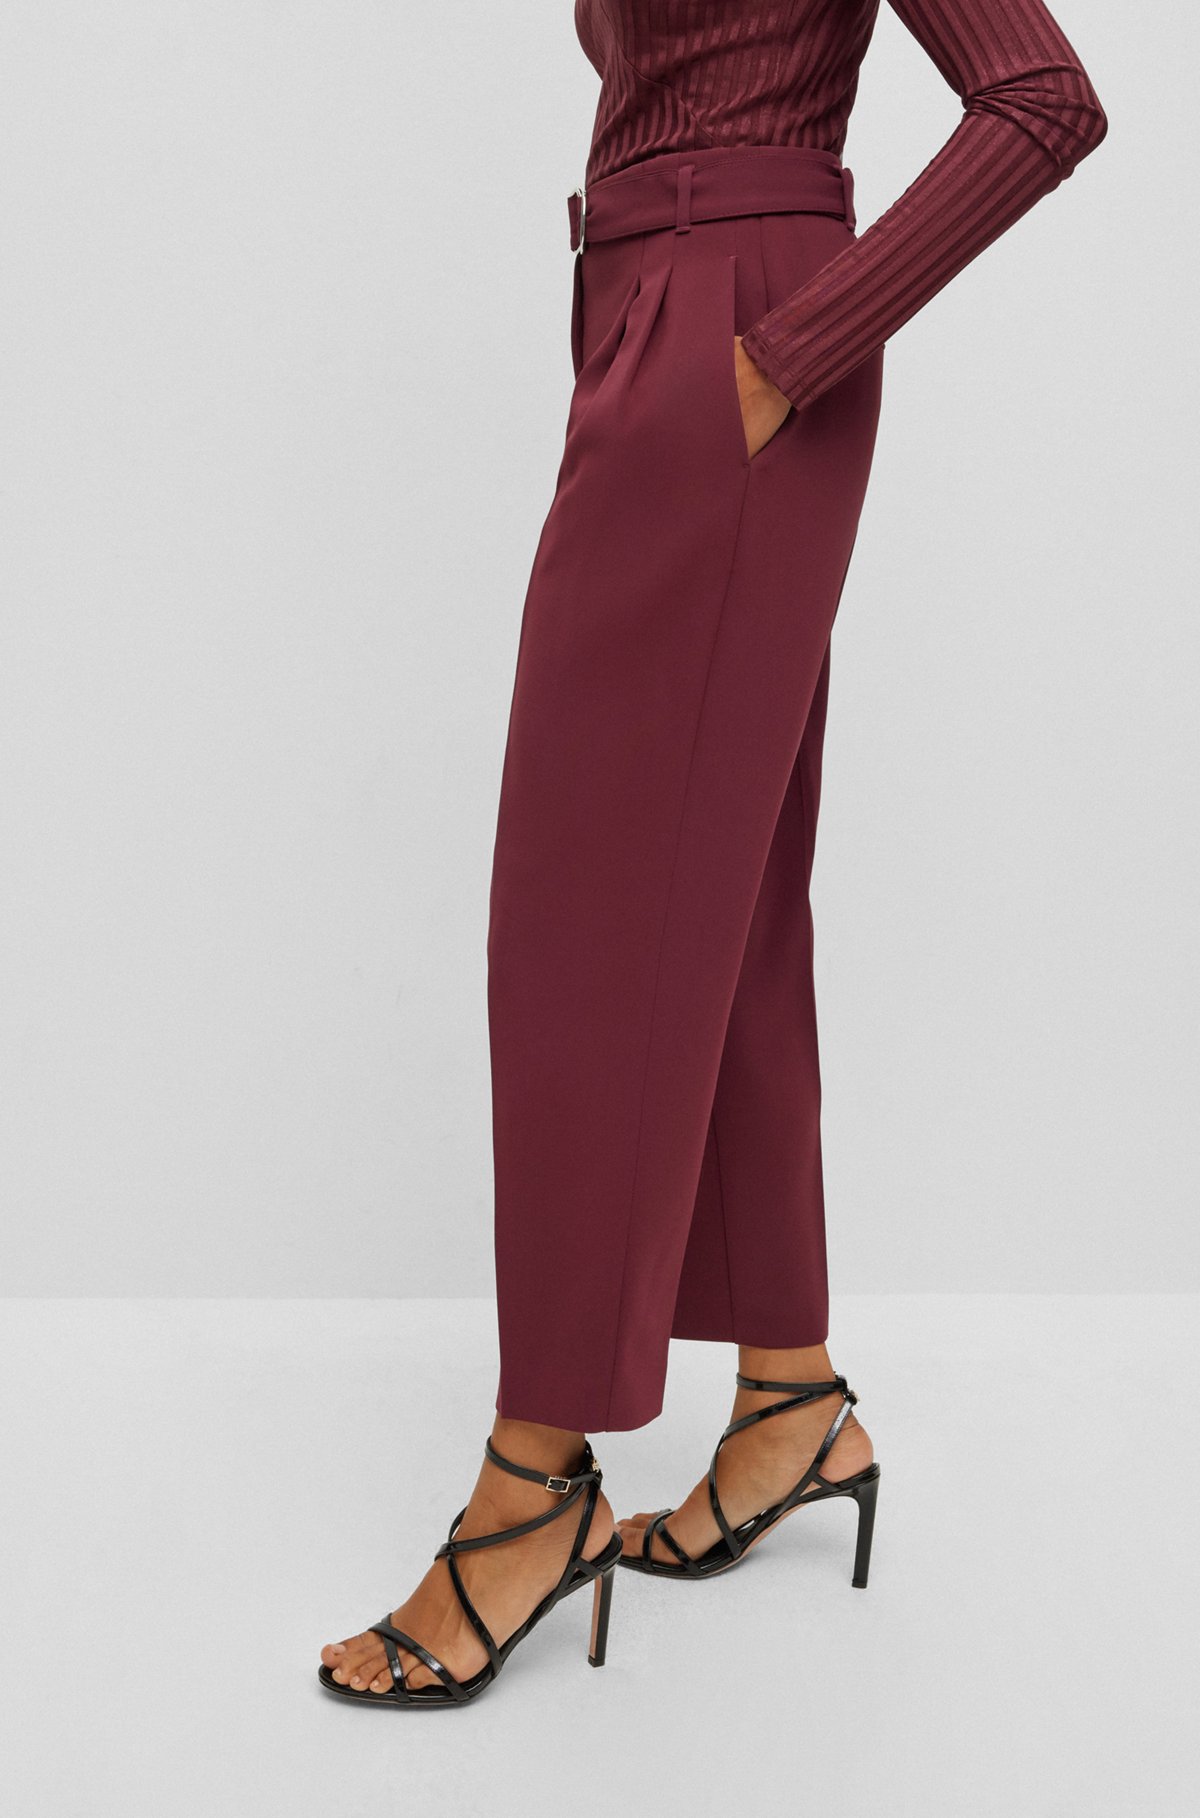 Cropped regular-fit trousers in Japanese crepe, Dark Red